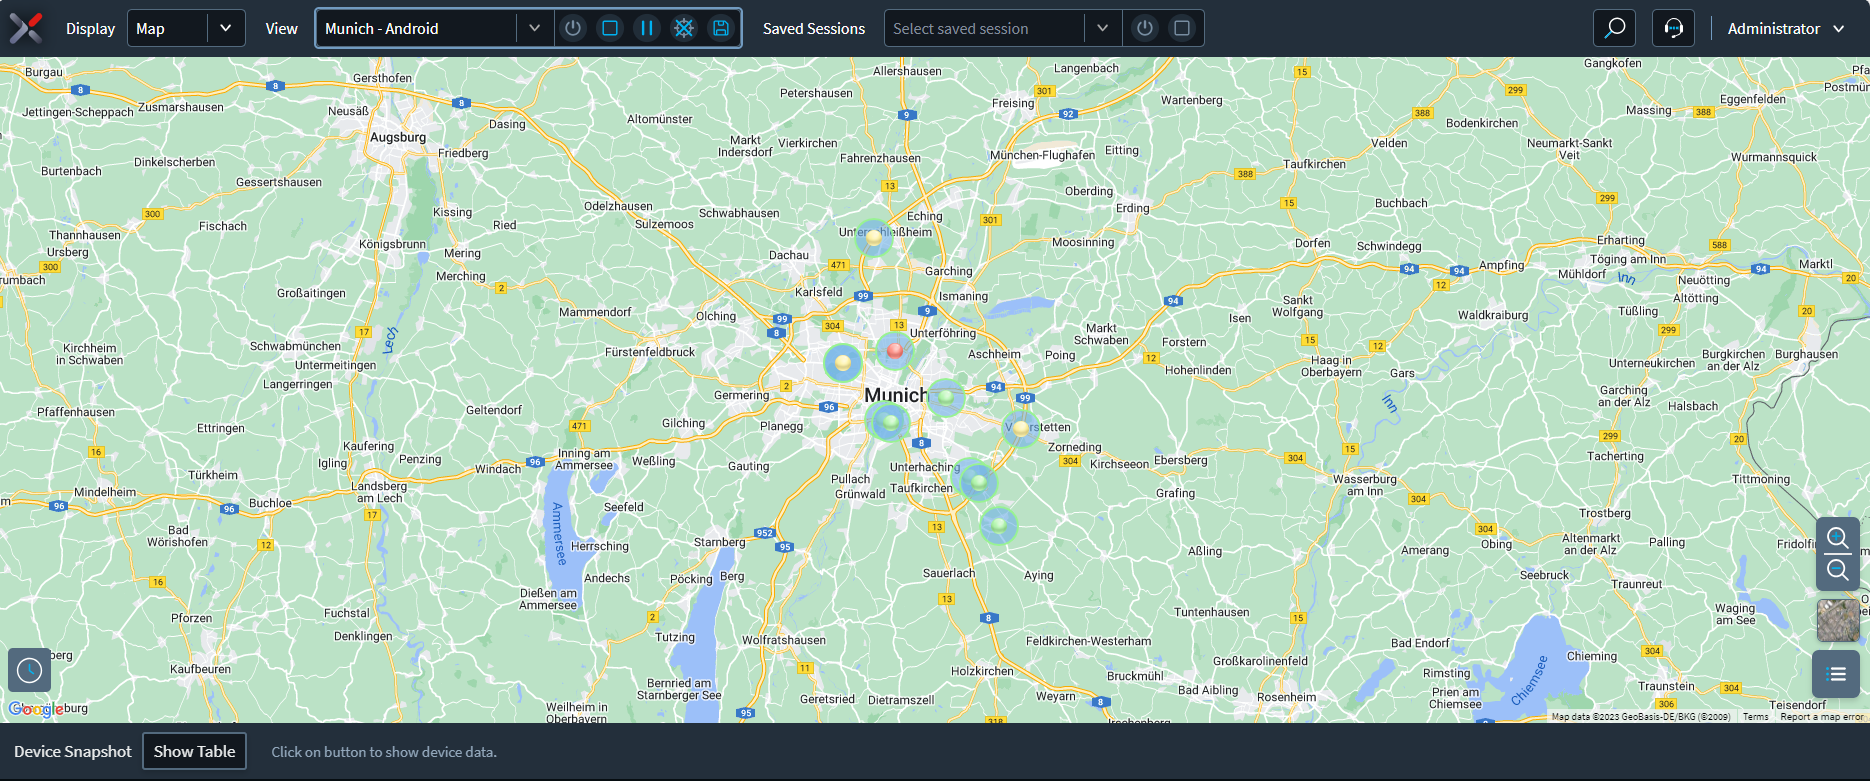 Live View screen showing several divices on a map